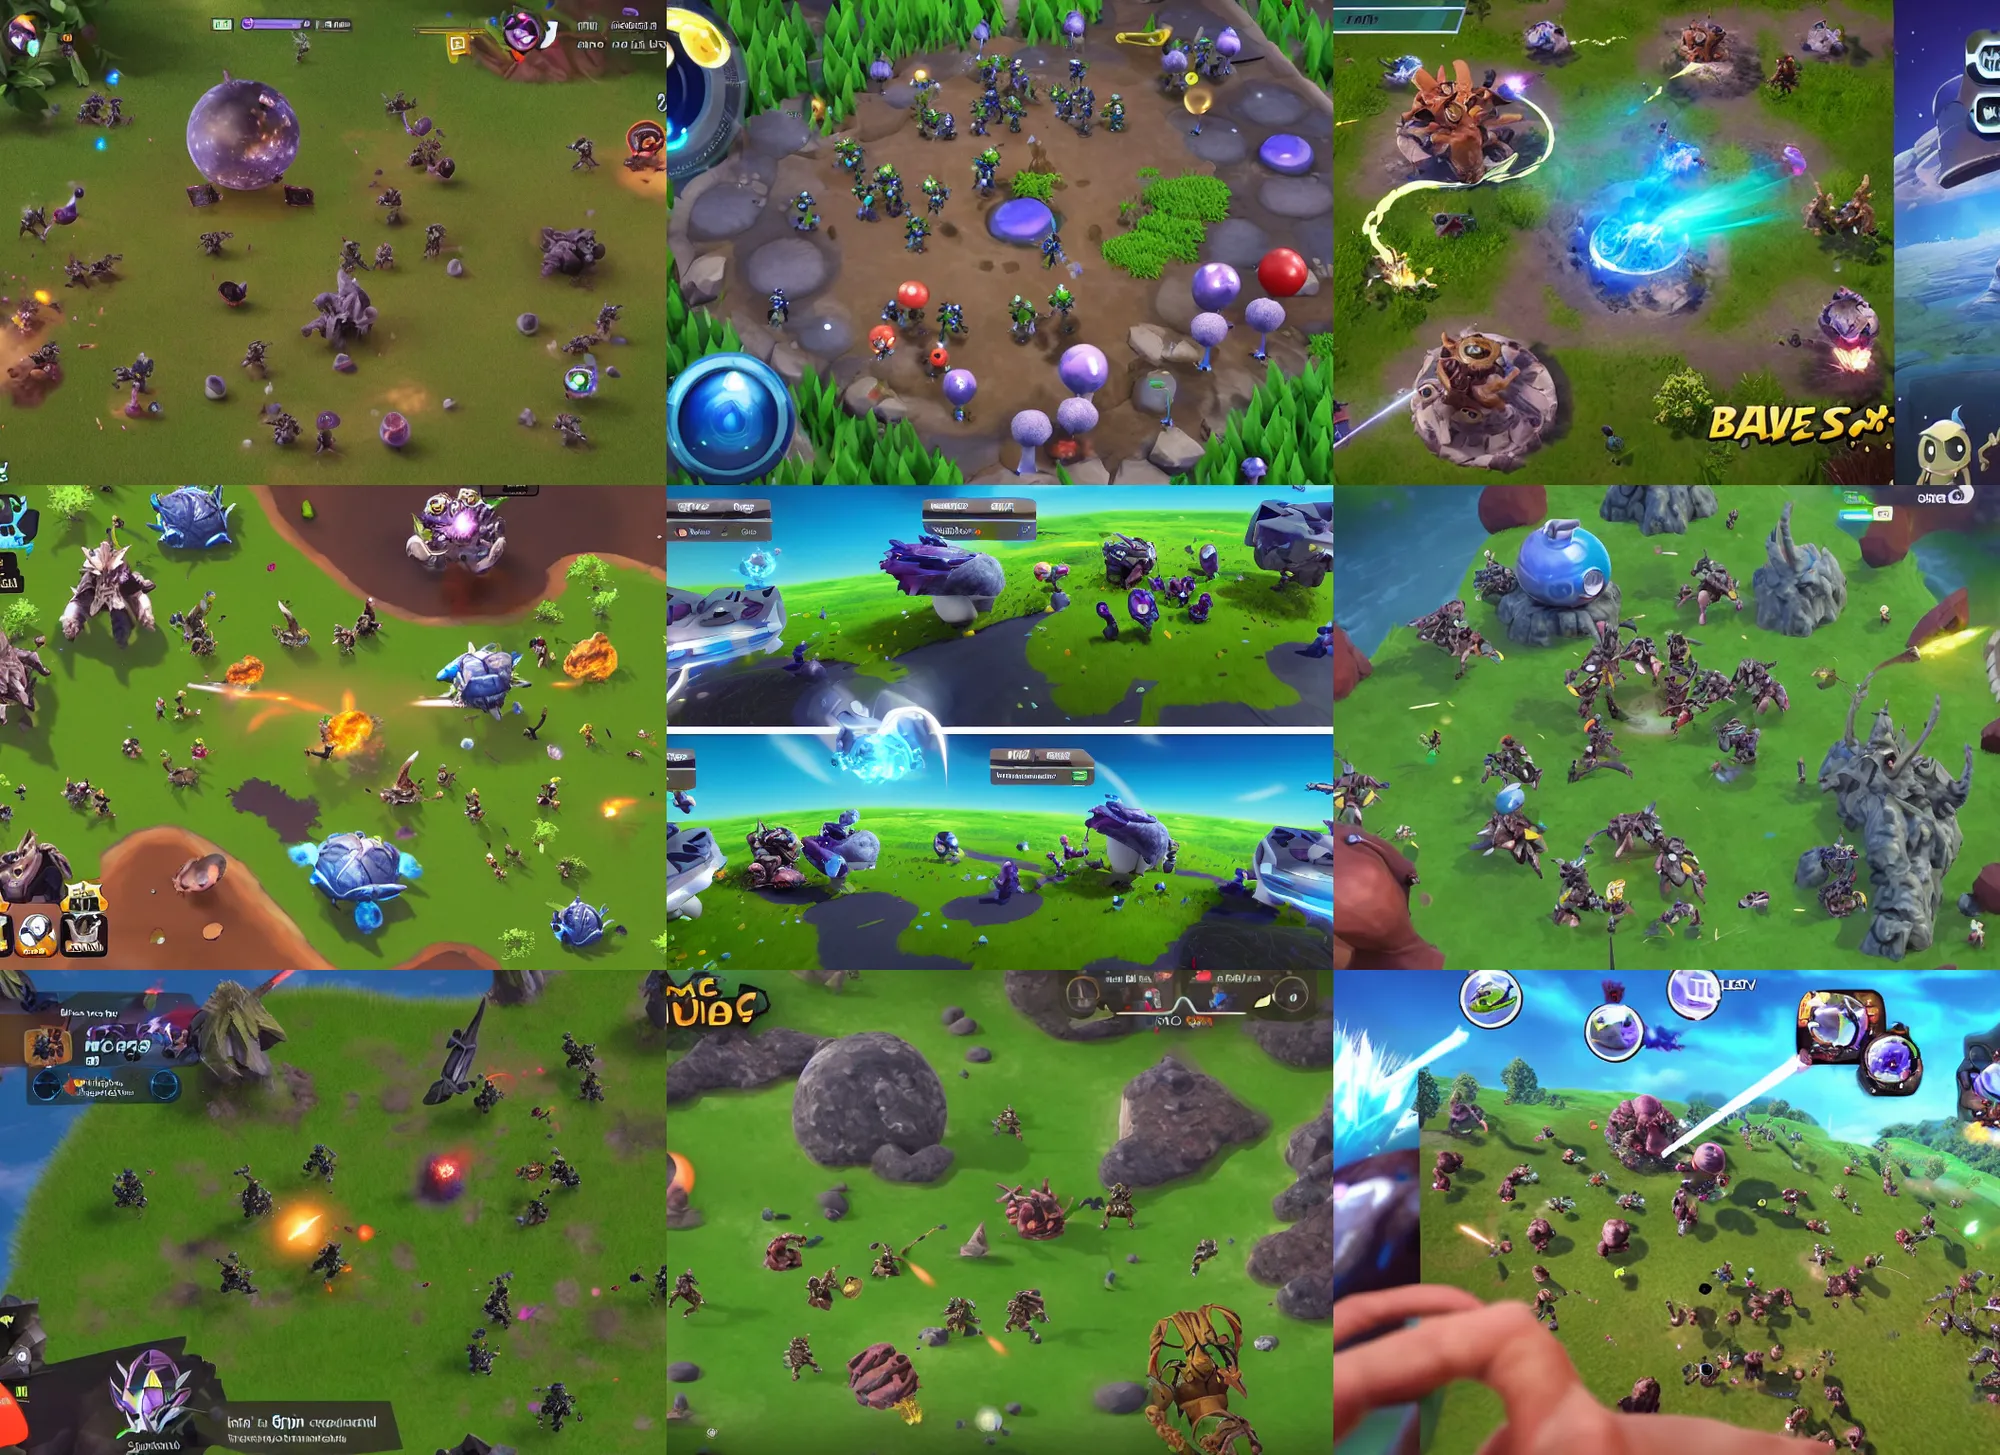 Prompt: epic fight between last two squads in mobile battle royale game about cute alien little animals that landed on a planet with different biomes, craters, alien capsules, bushes in the visual style of Spore and Eternal Cylinder, world curvature, game overlay, hp mp stamina bars, 3rd person camera, overhead view, over-the-shoulder